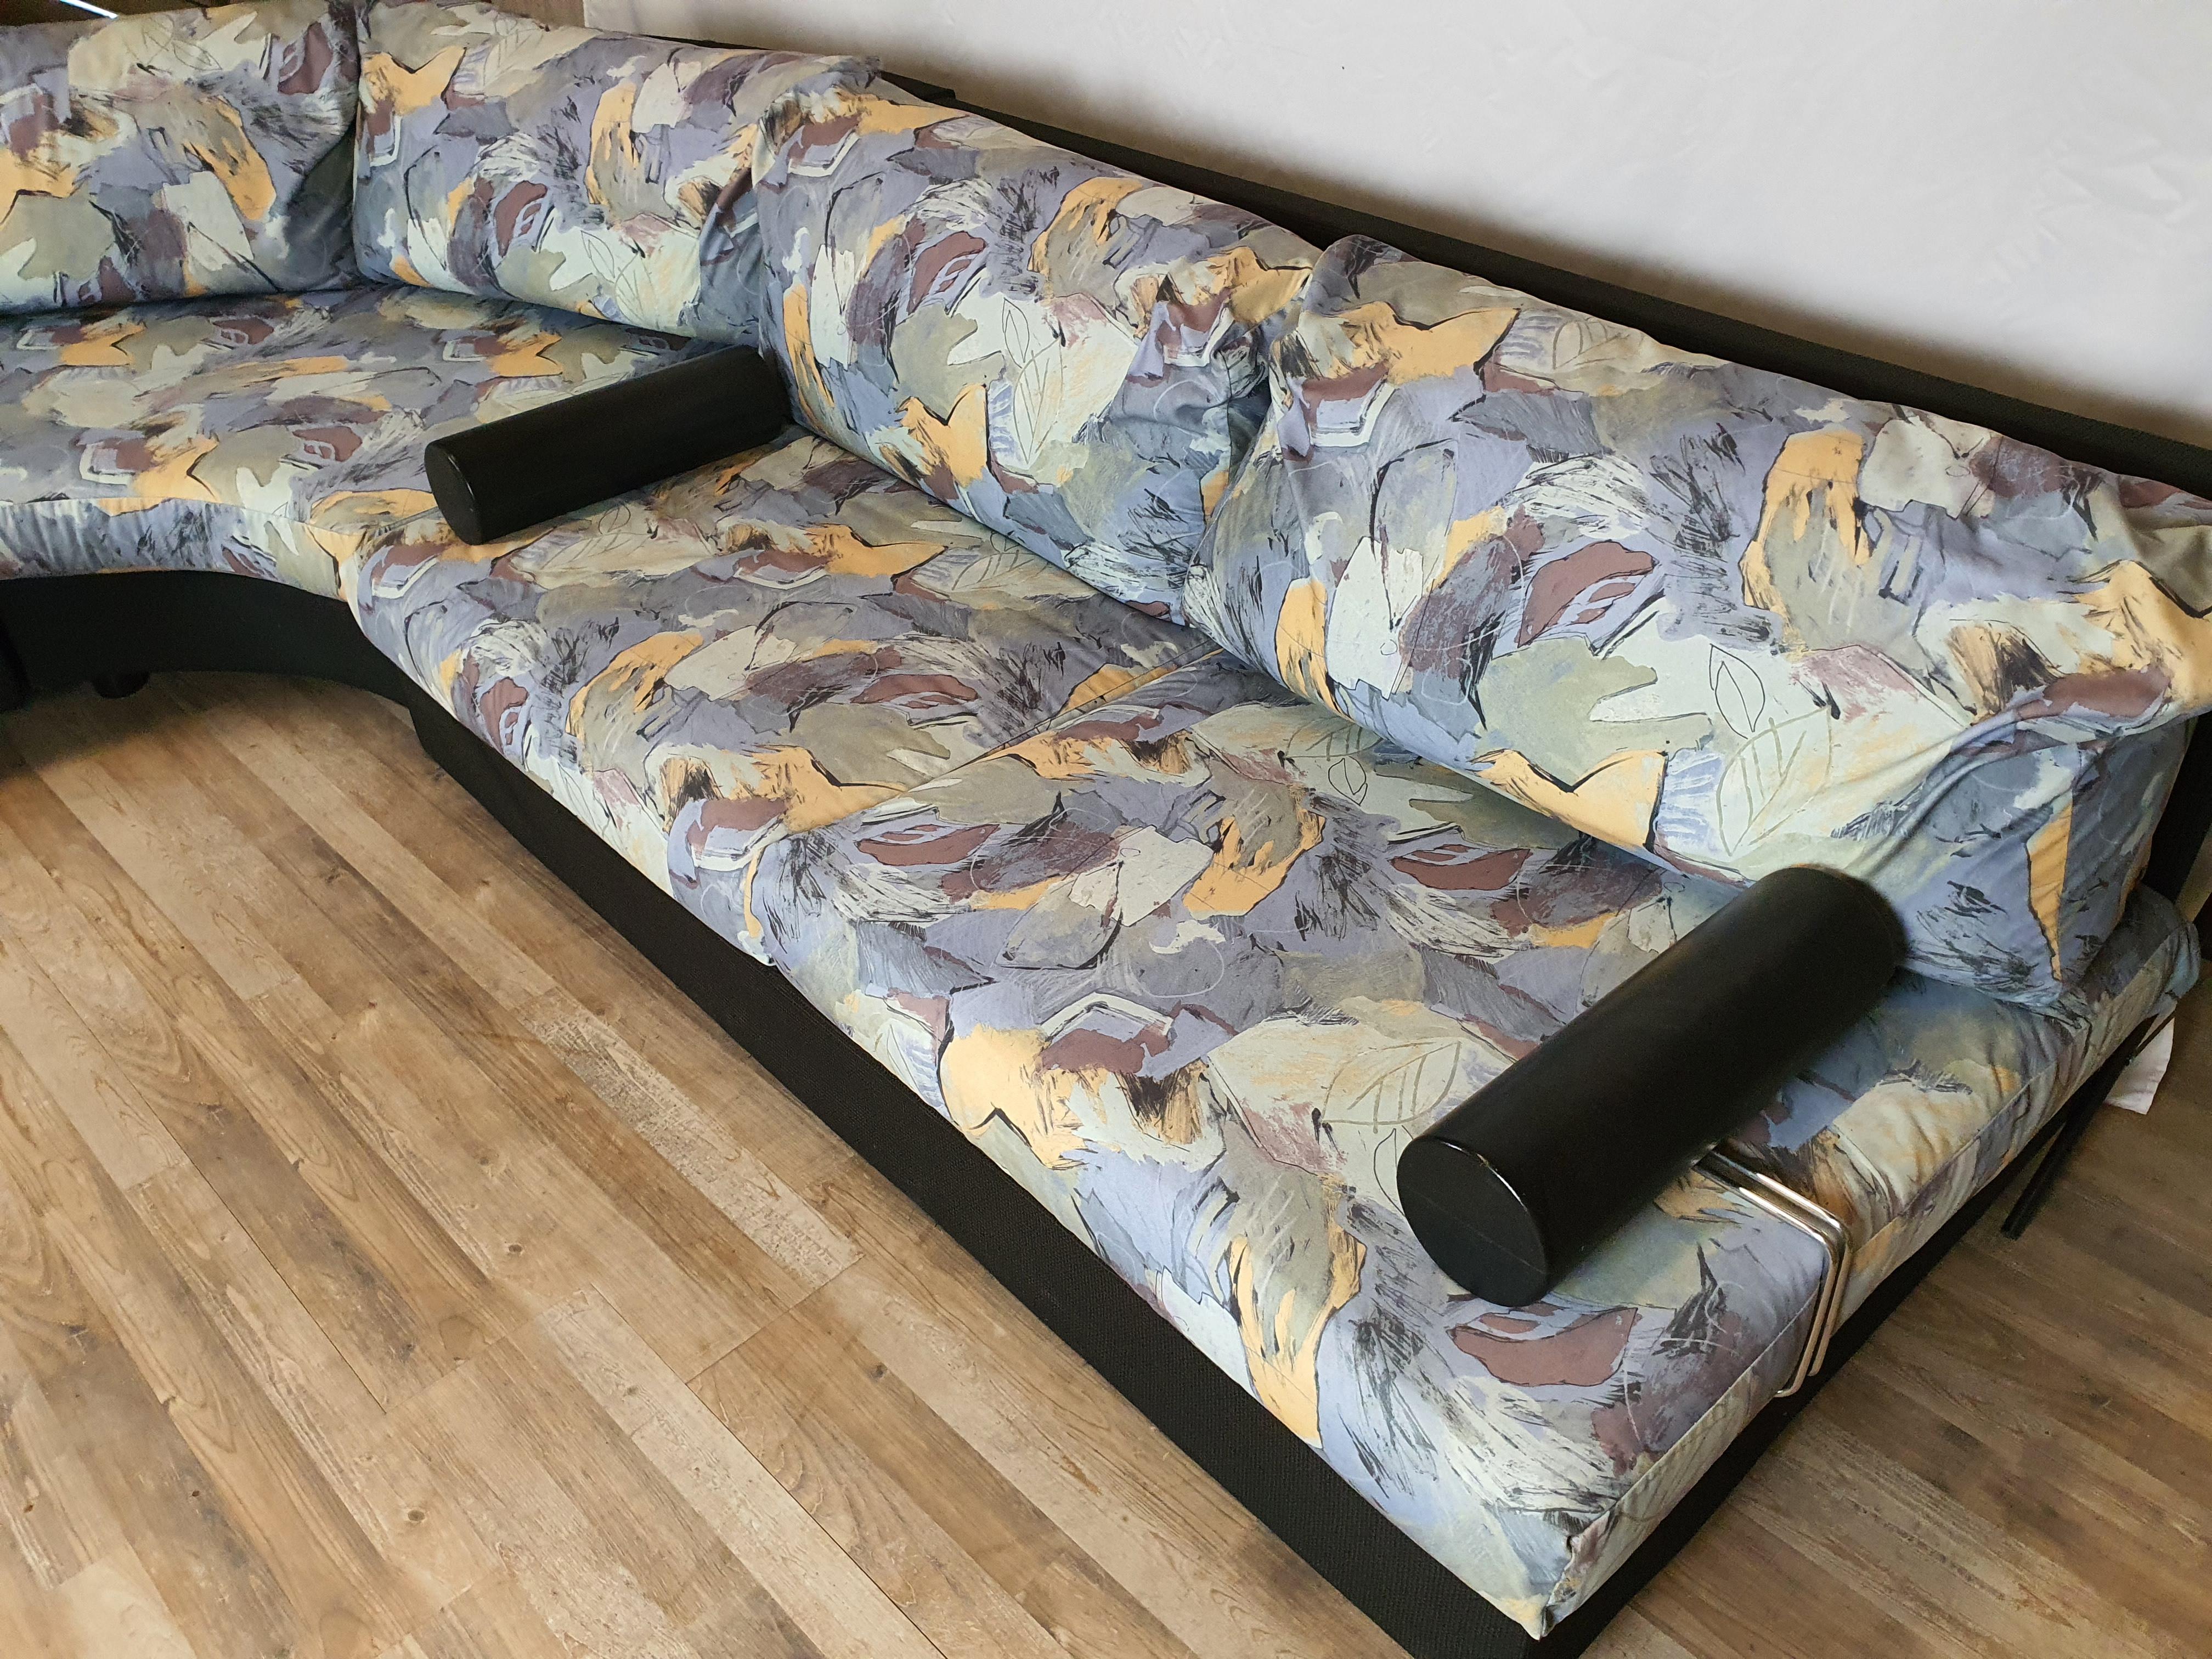 Modular Vintage Sofa with Cushions and Armrests In Good Condition For Sale In Premariacco, IT